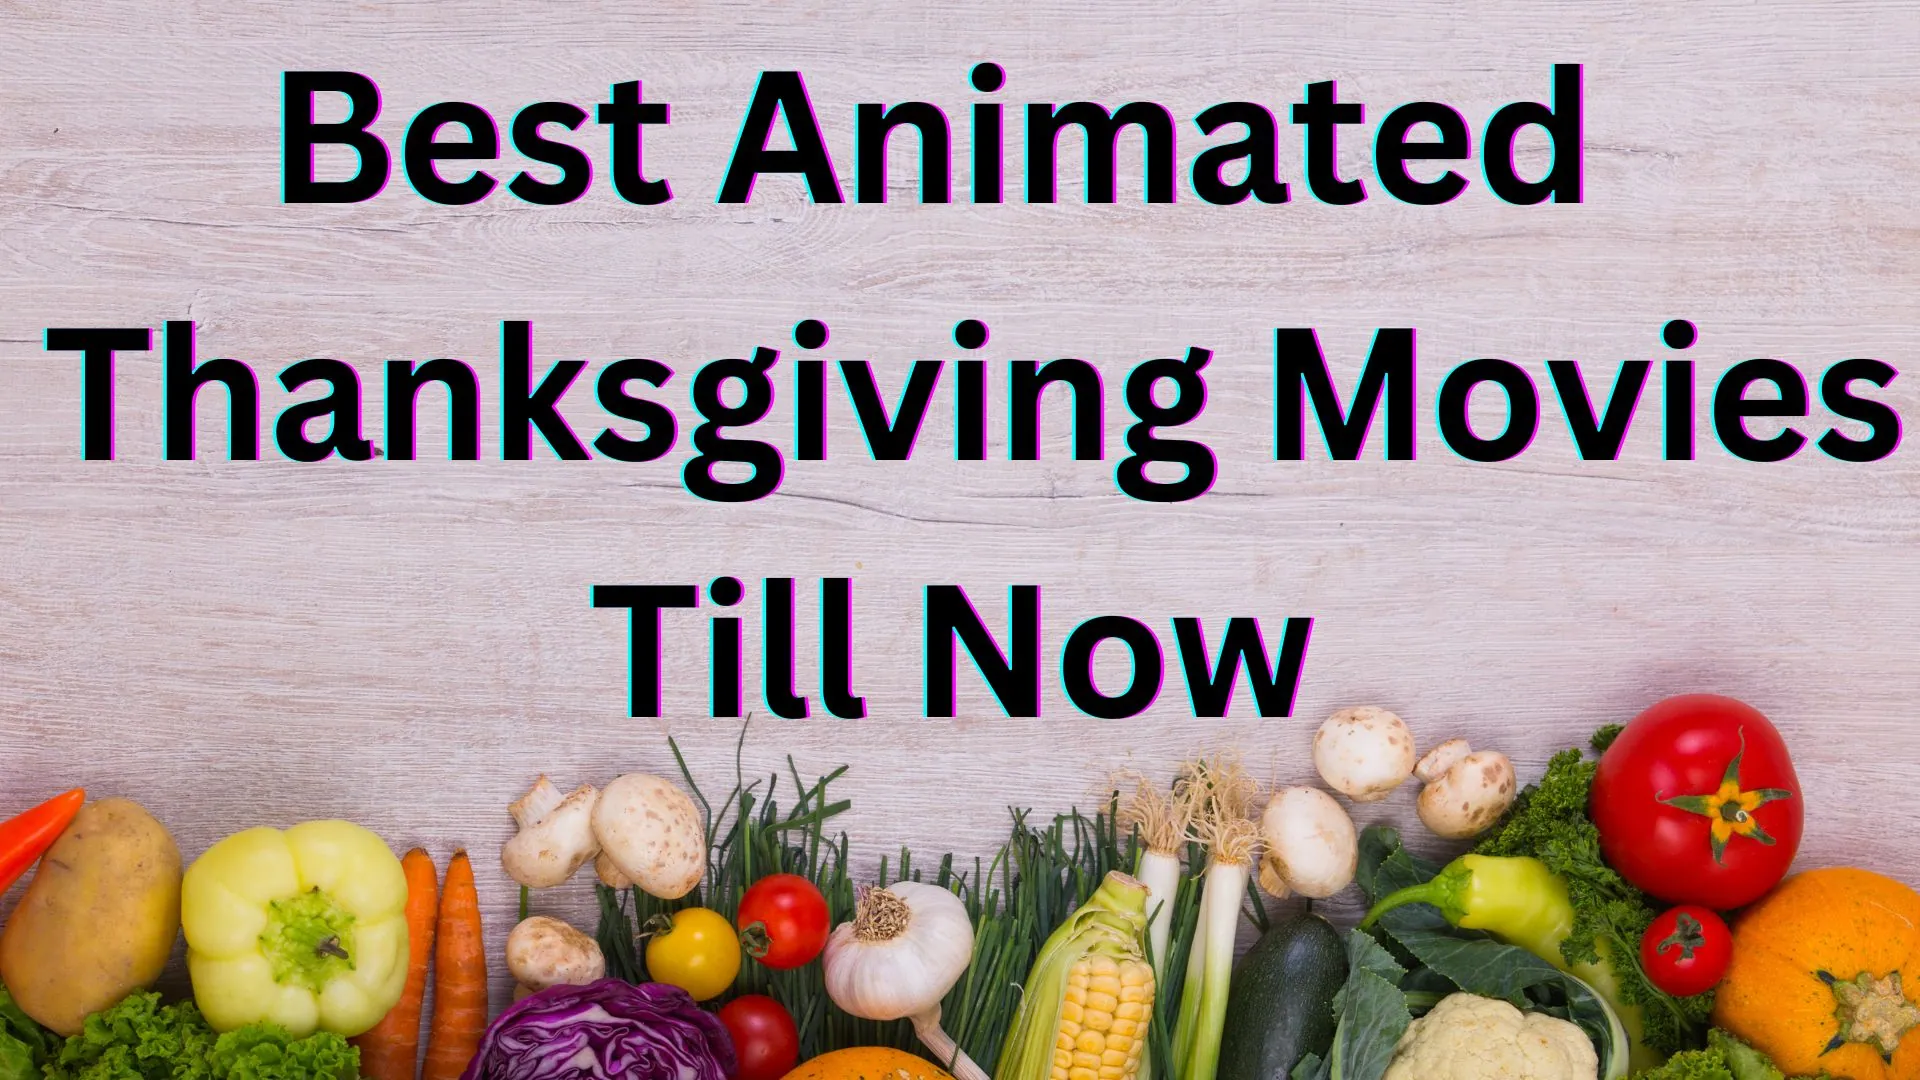 Best Animated Thanksgiving Movies Till Now